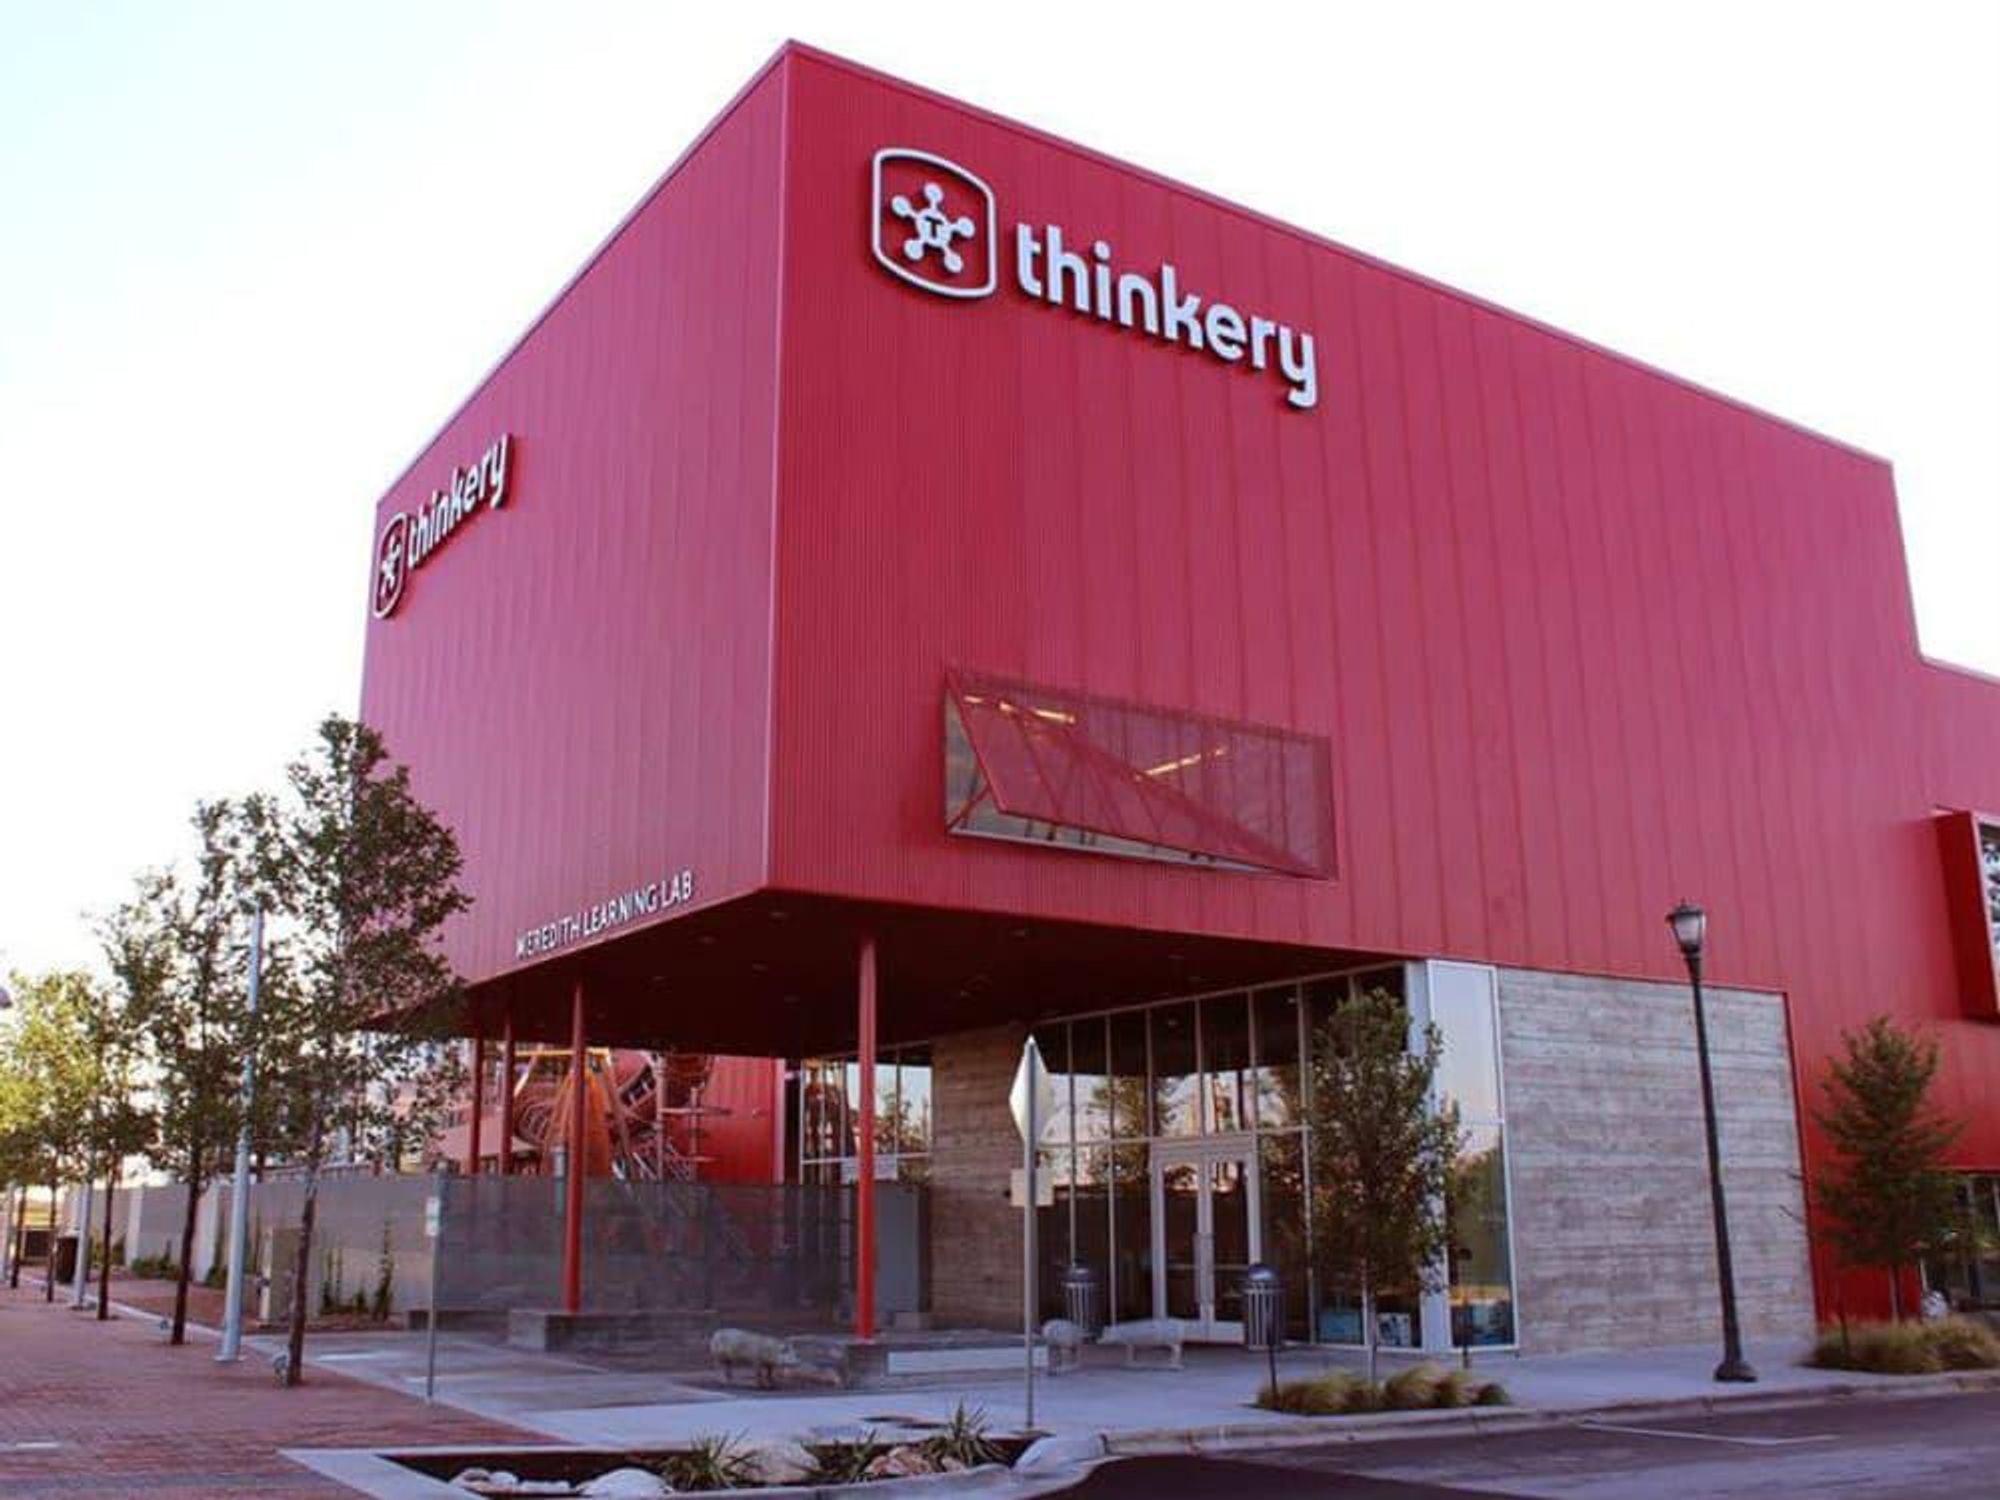 exterior of The Thinkery or the New Austin Children's Museum